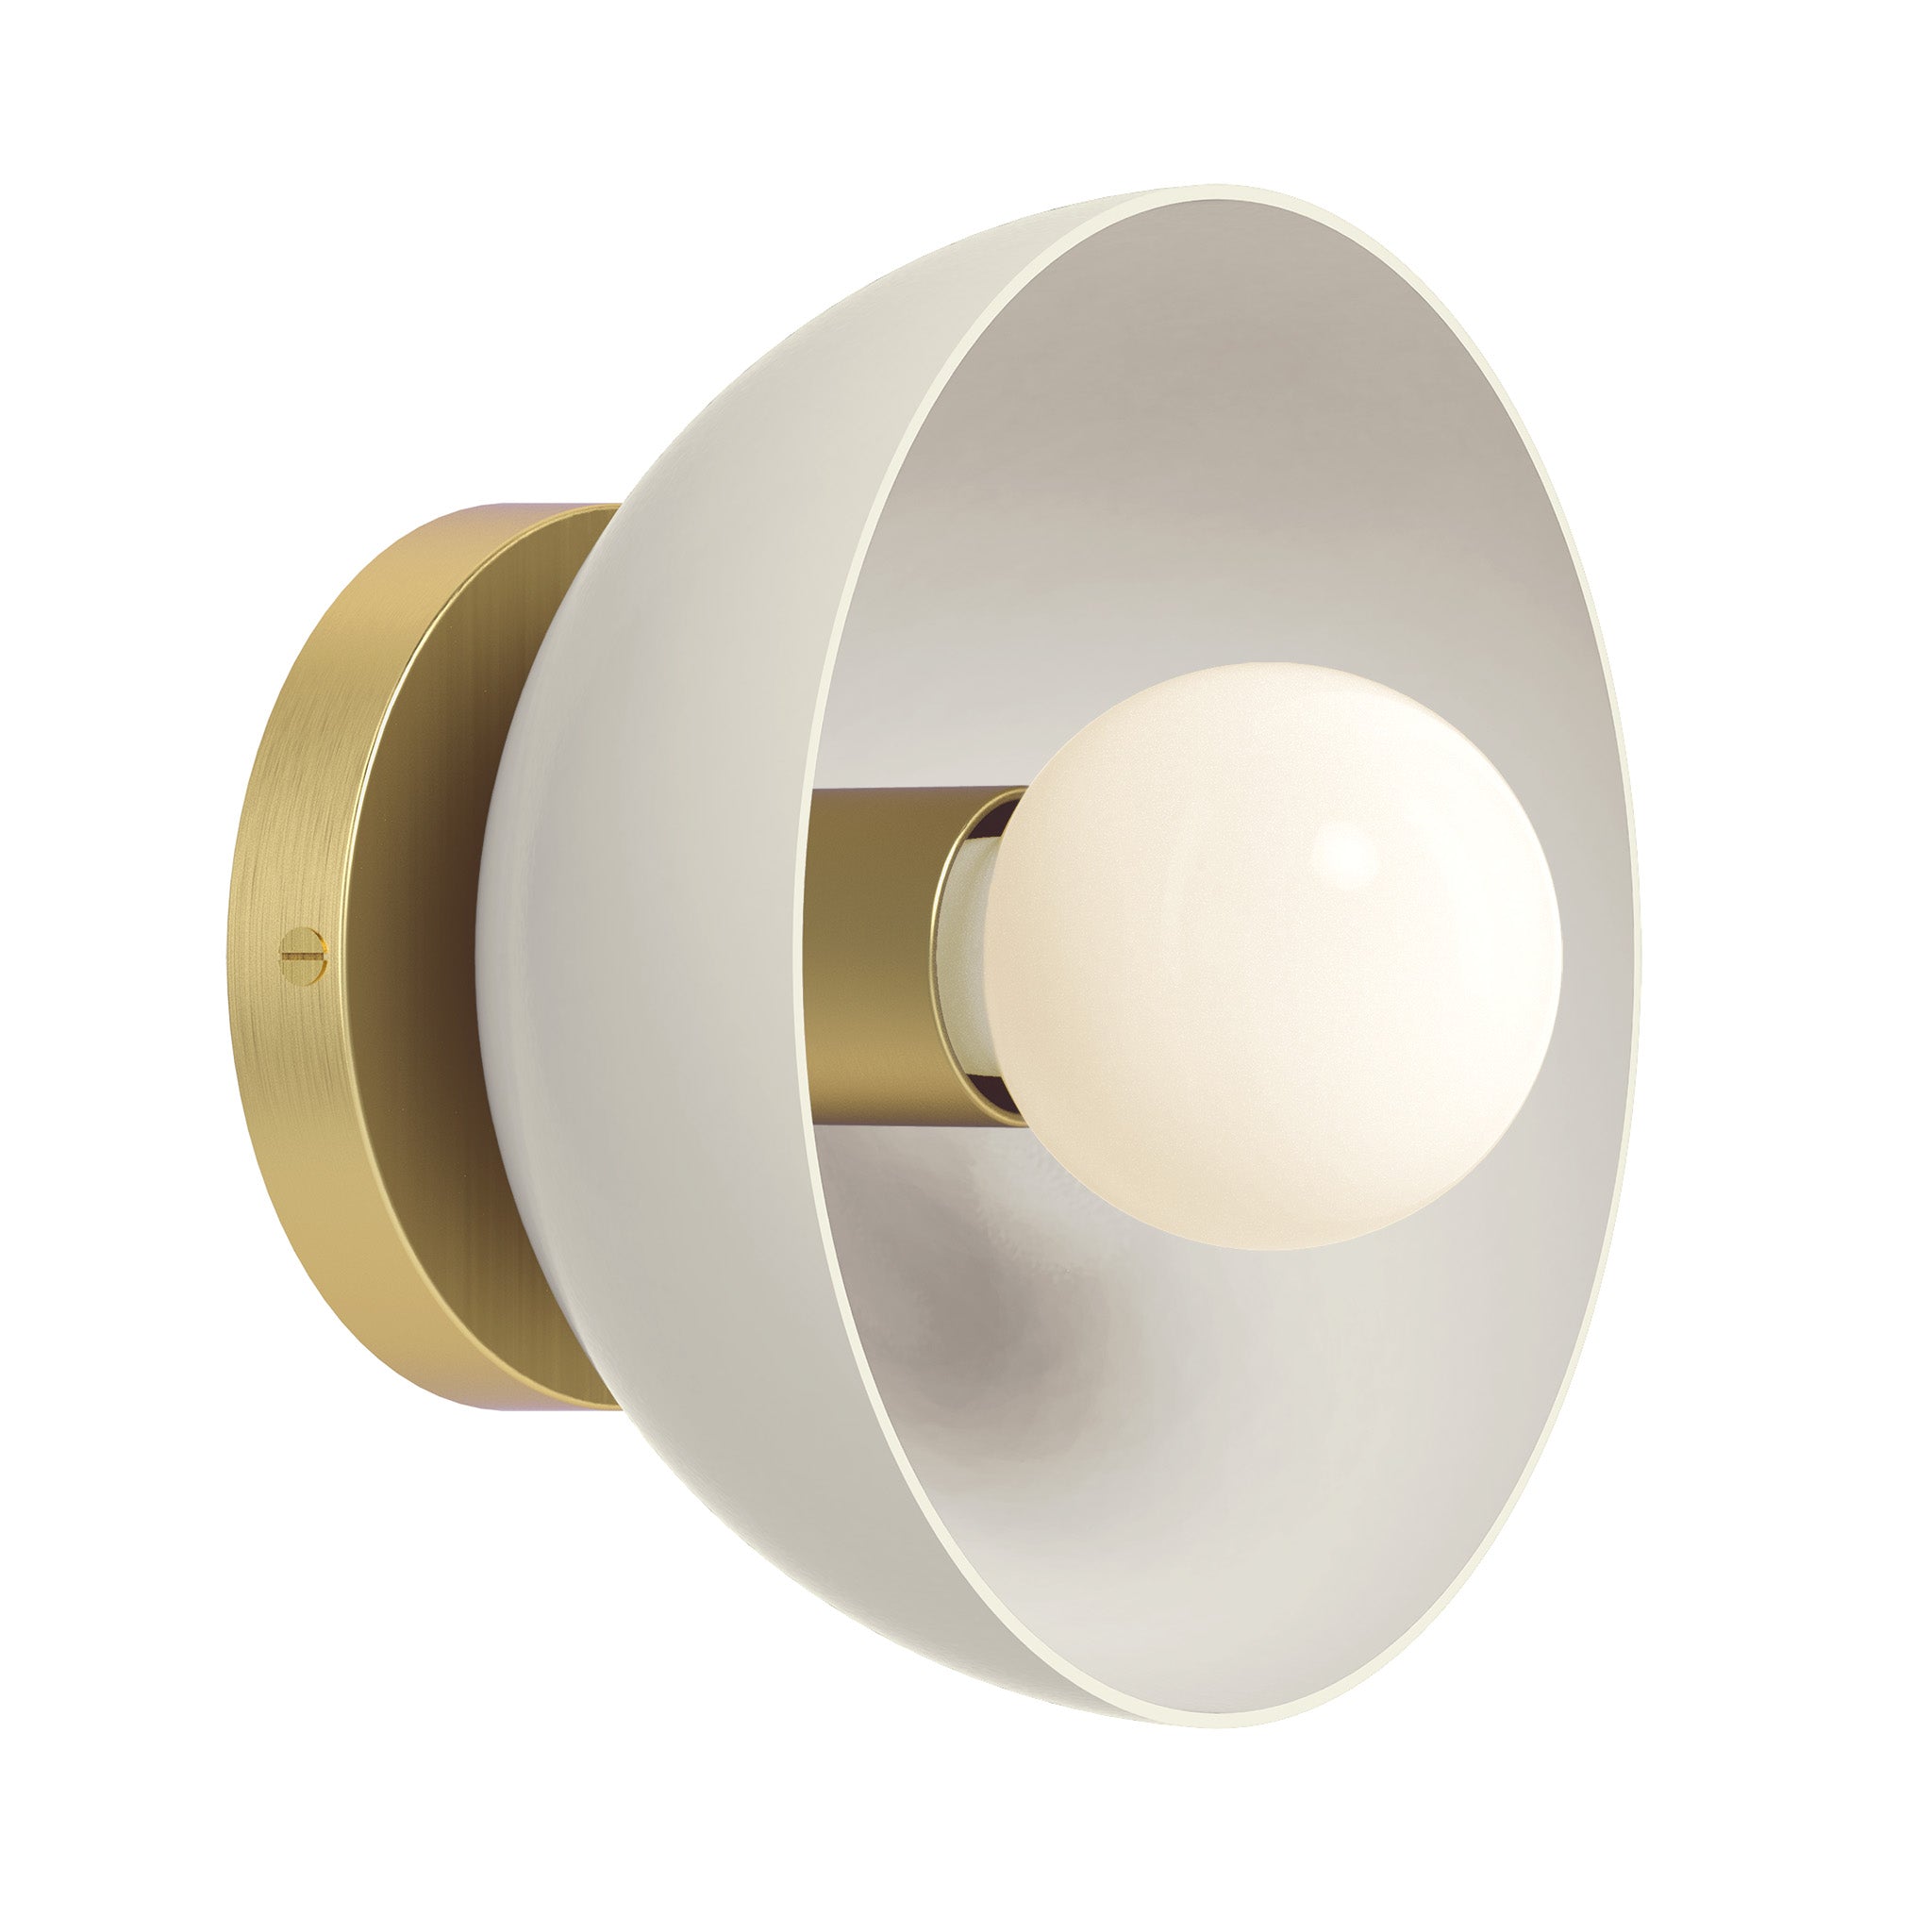 Brass and bone color Hemi sconce 8" Dutton Brown lighting